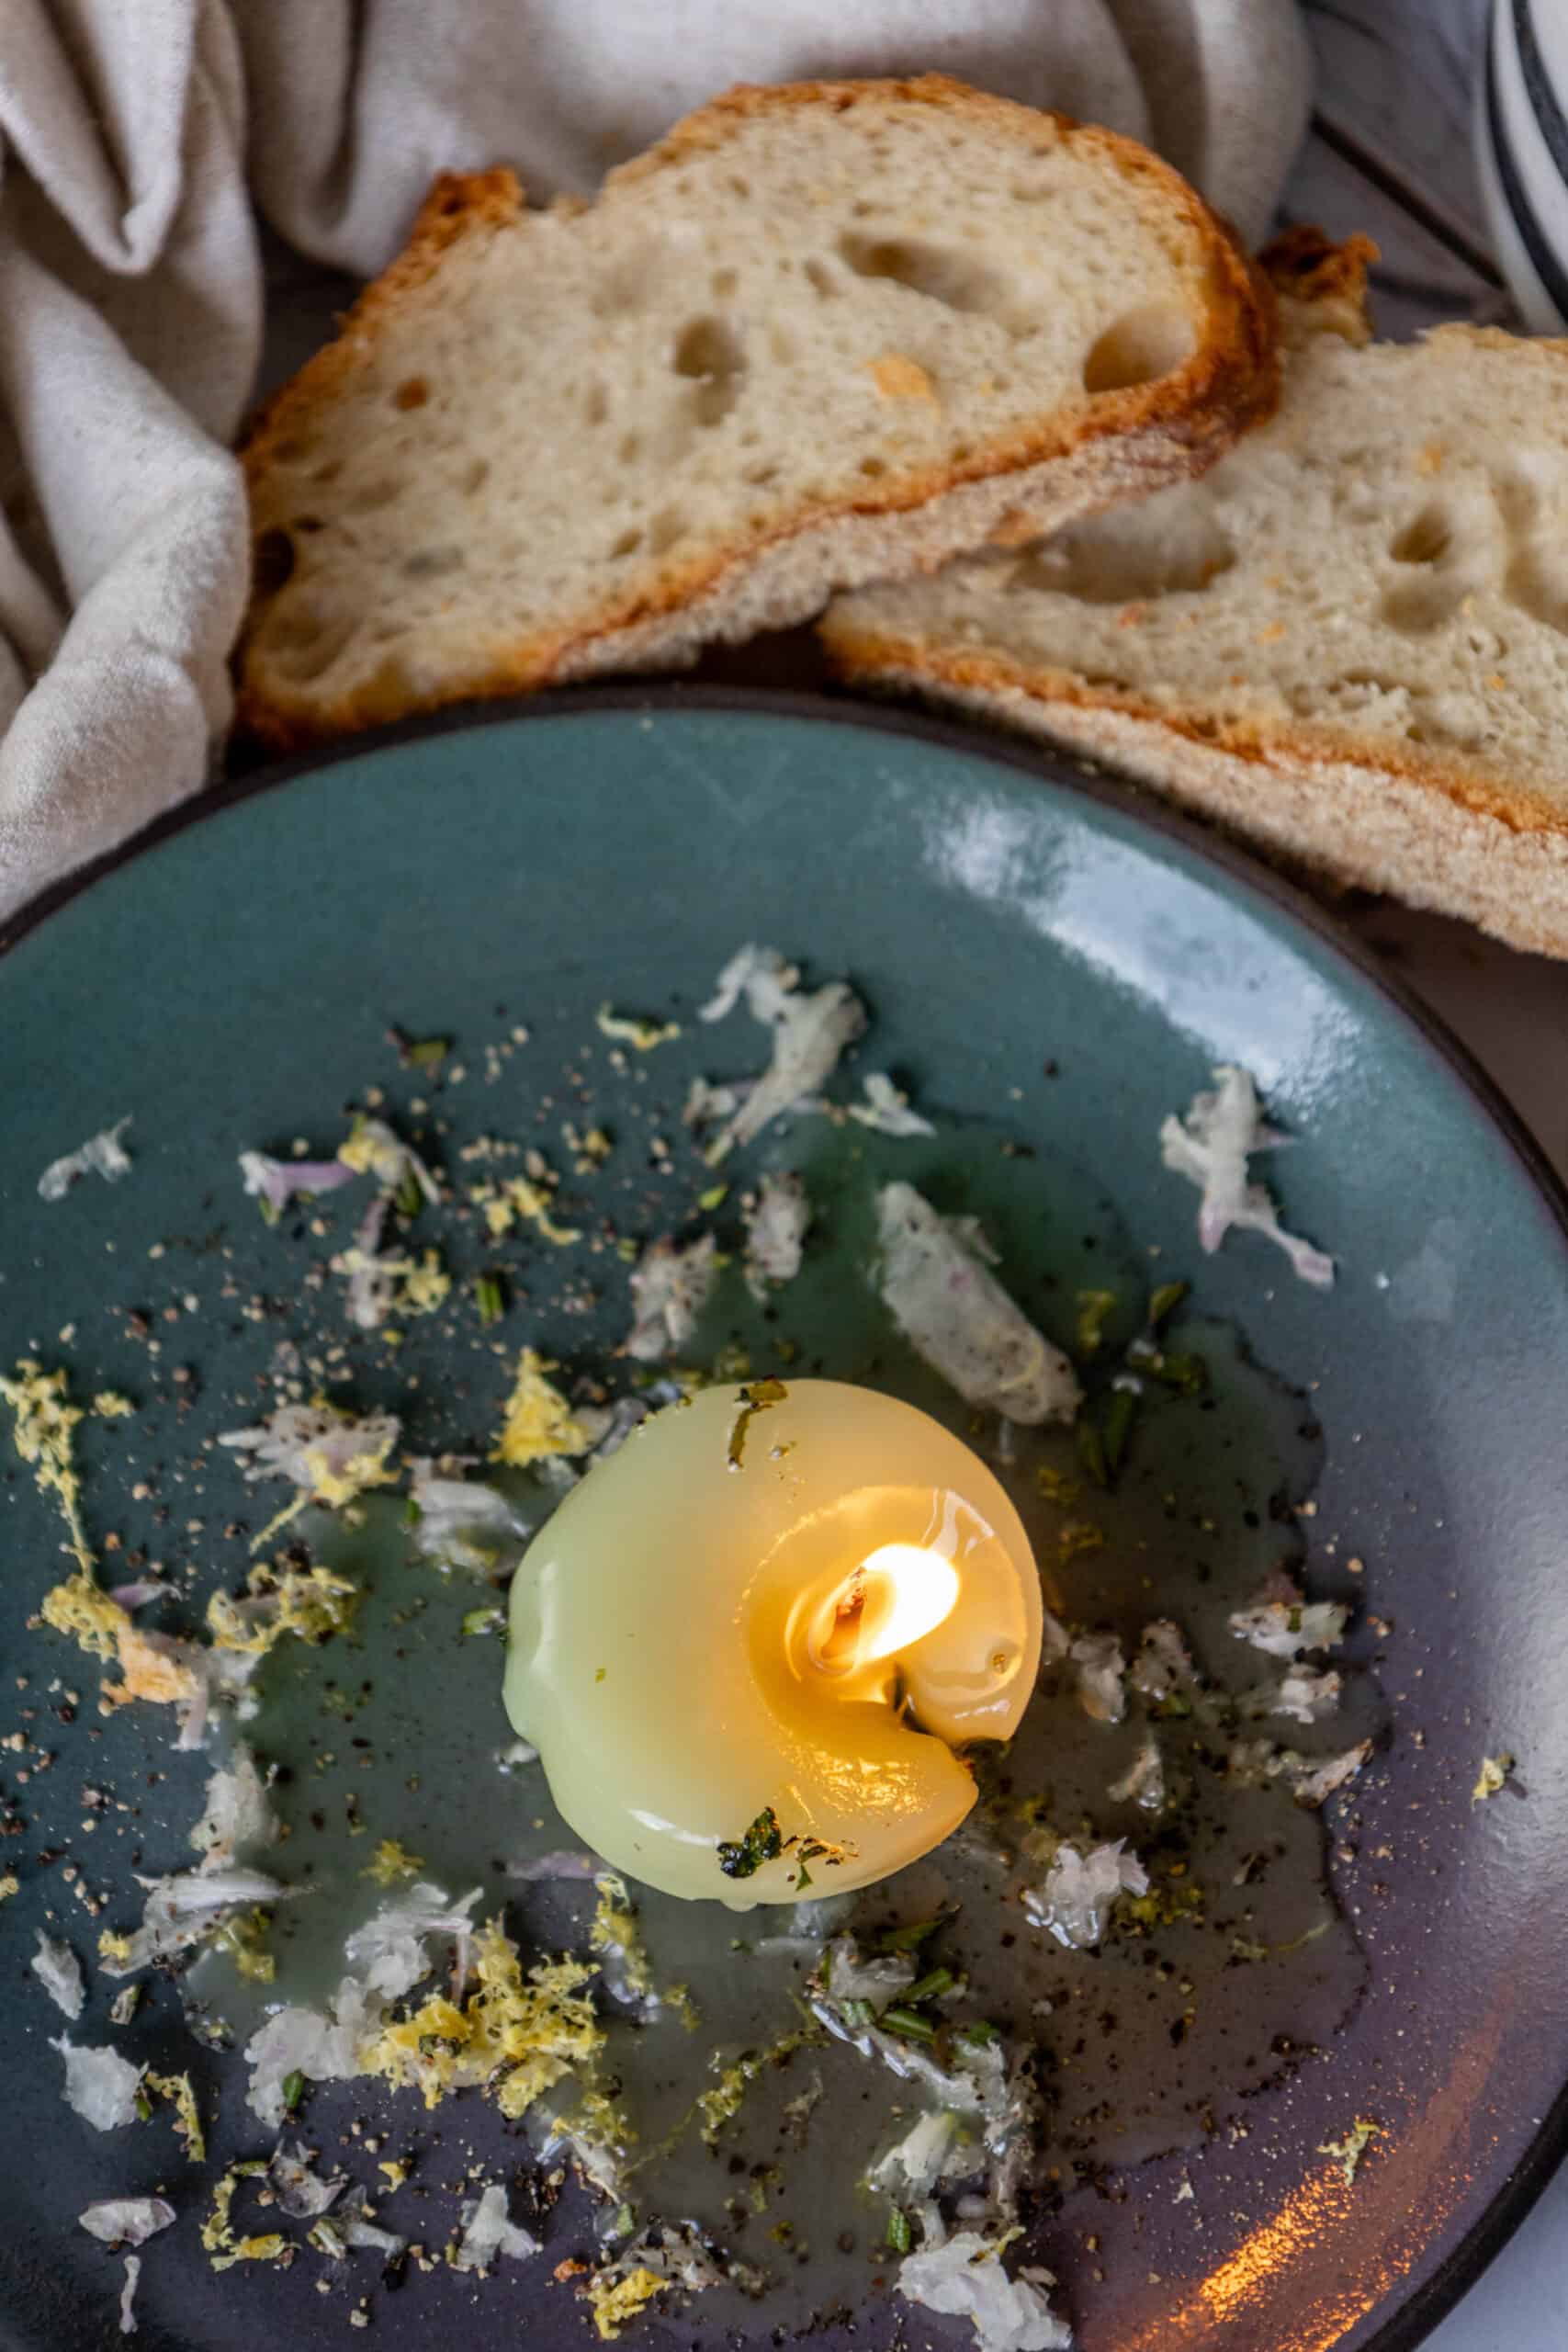 A plate of bread with a Tallow Candle on it.